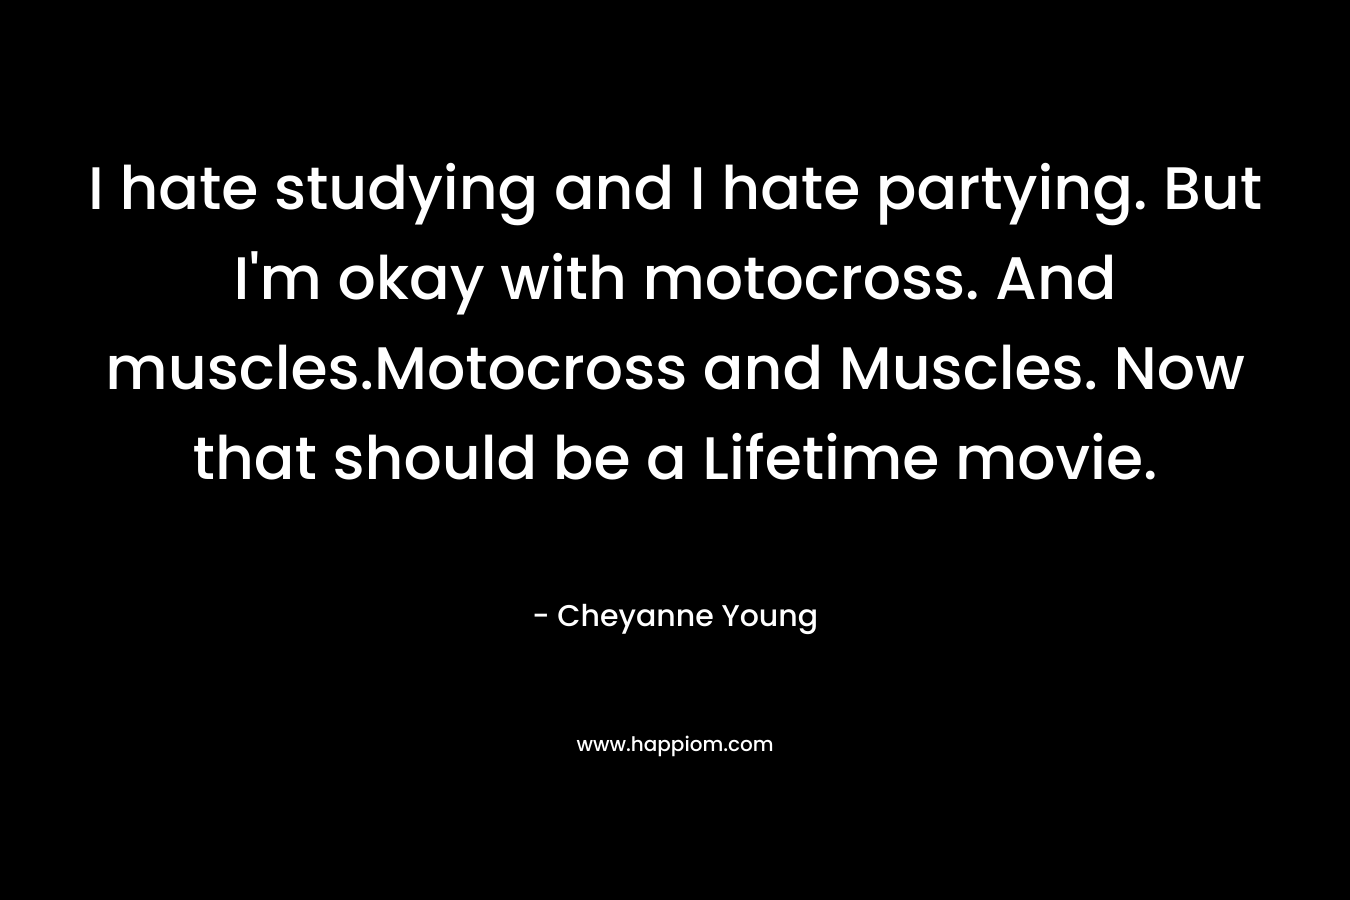 I hate studying and I hate partying. But I’m okay with motocross. And muscles.Motocross and Muscles. Now that should be a Lifetime movie. – Cheyanne Young